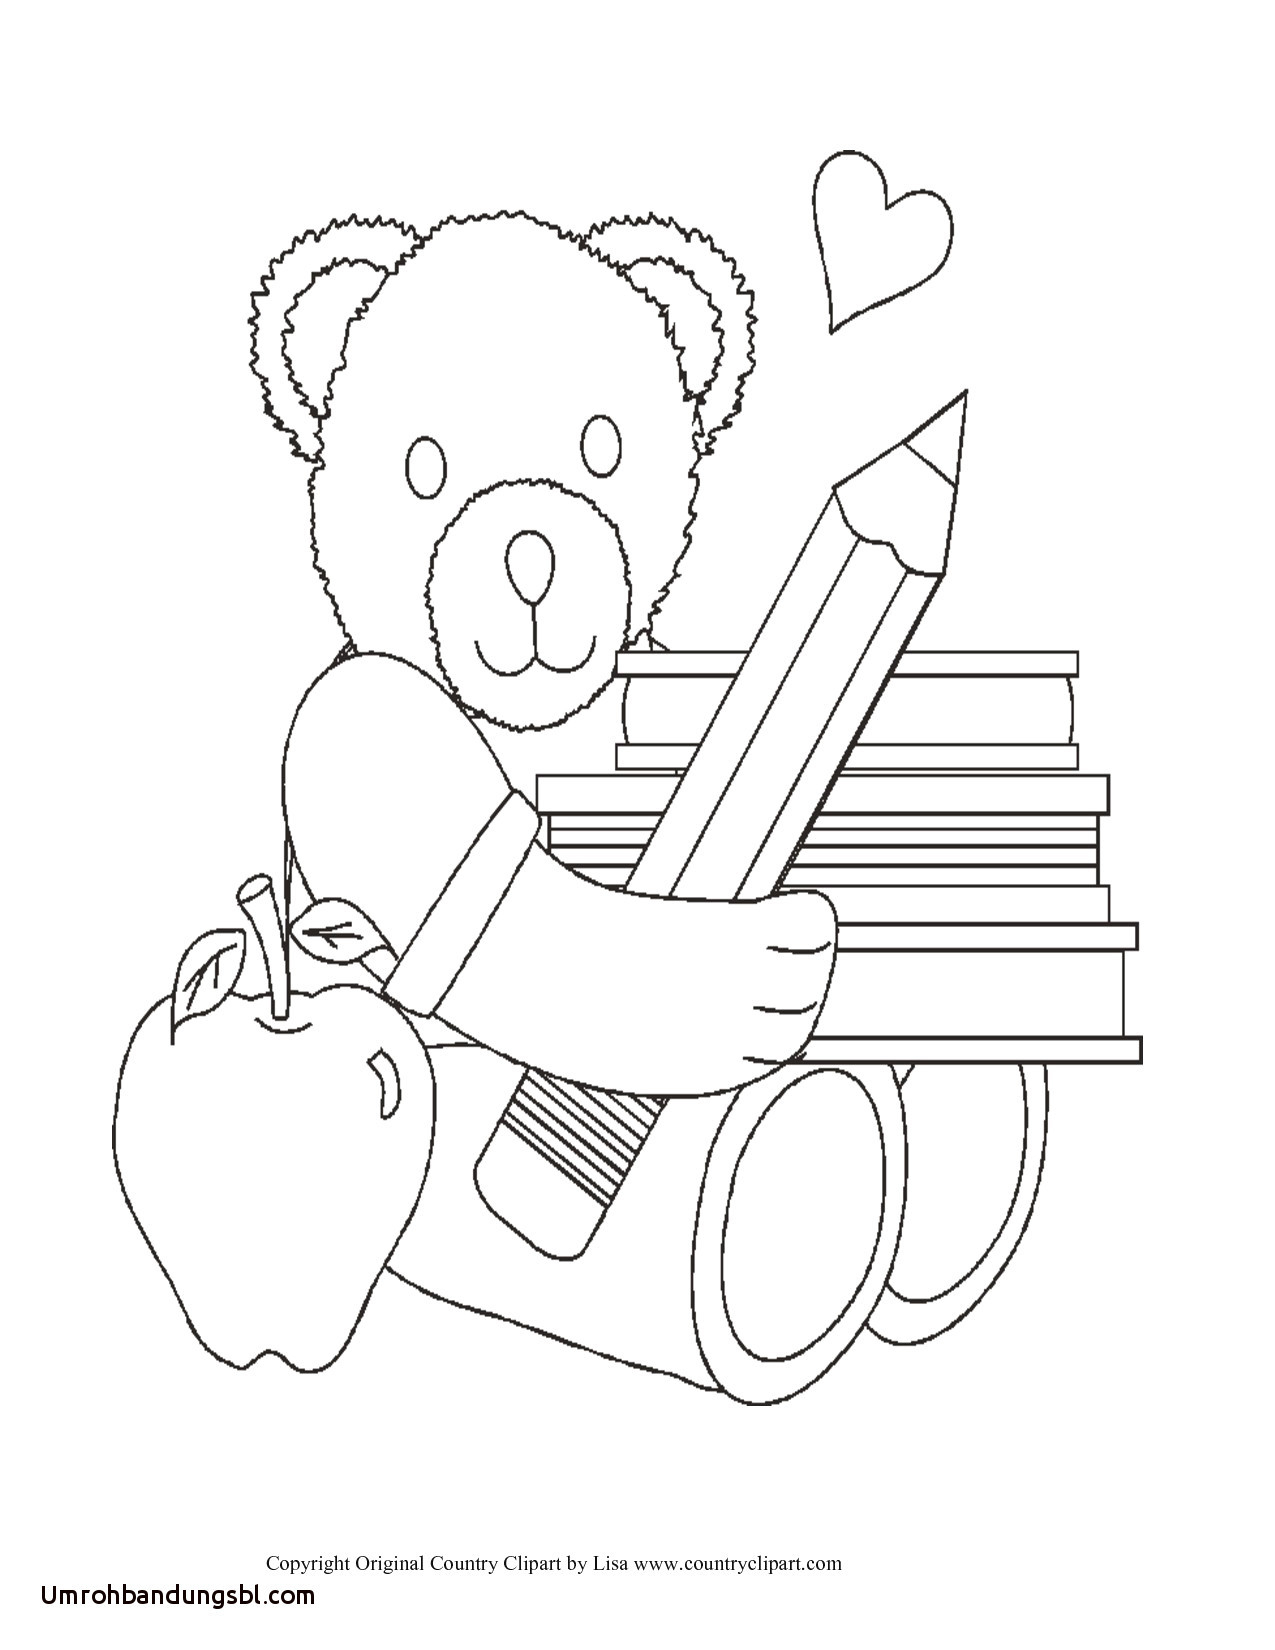 Wwe Coloring Pages Of John Cena Advent Coloring Pages For Kids Awesome Einzigartig Wwe Coloring